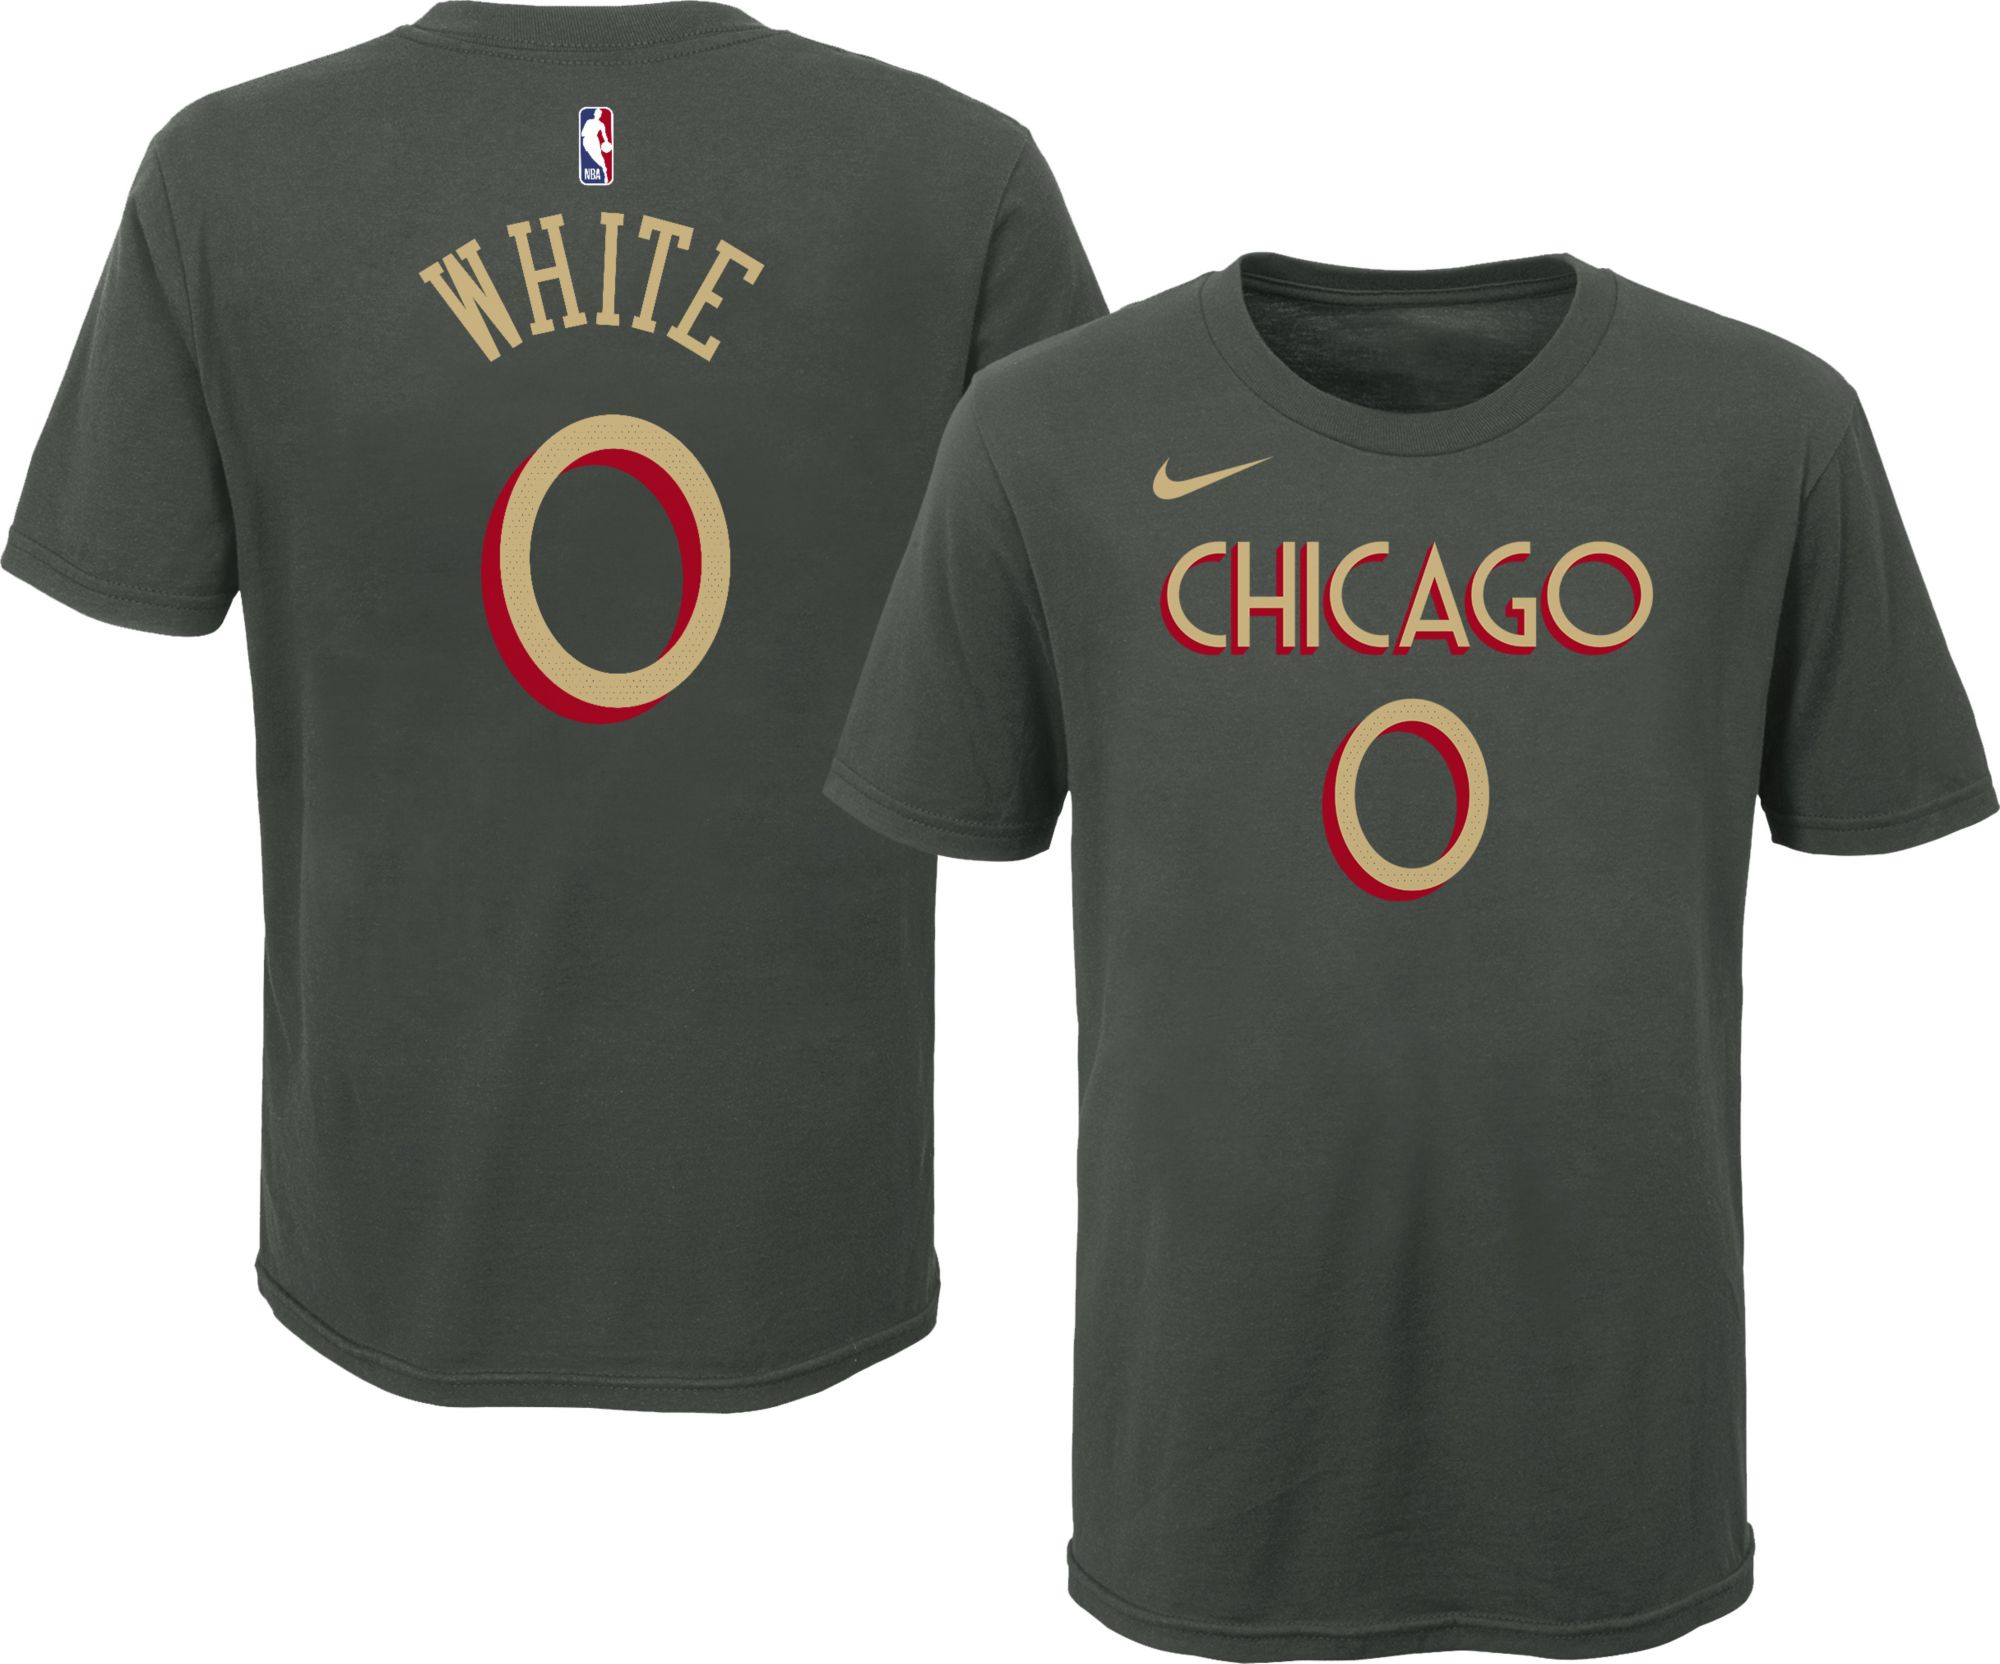 coby white youth jersey